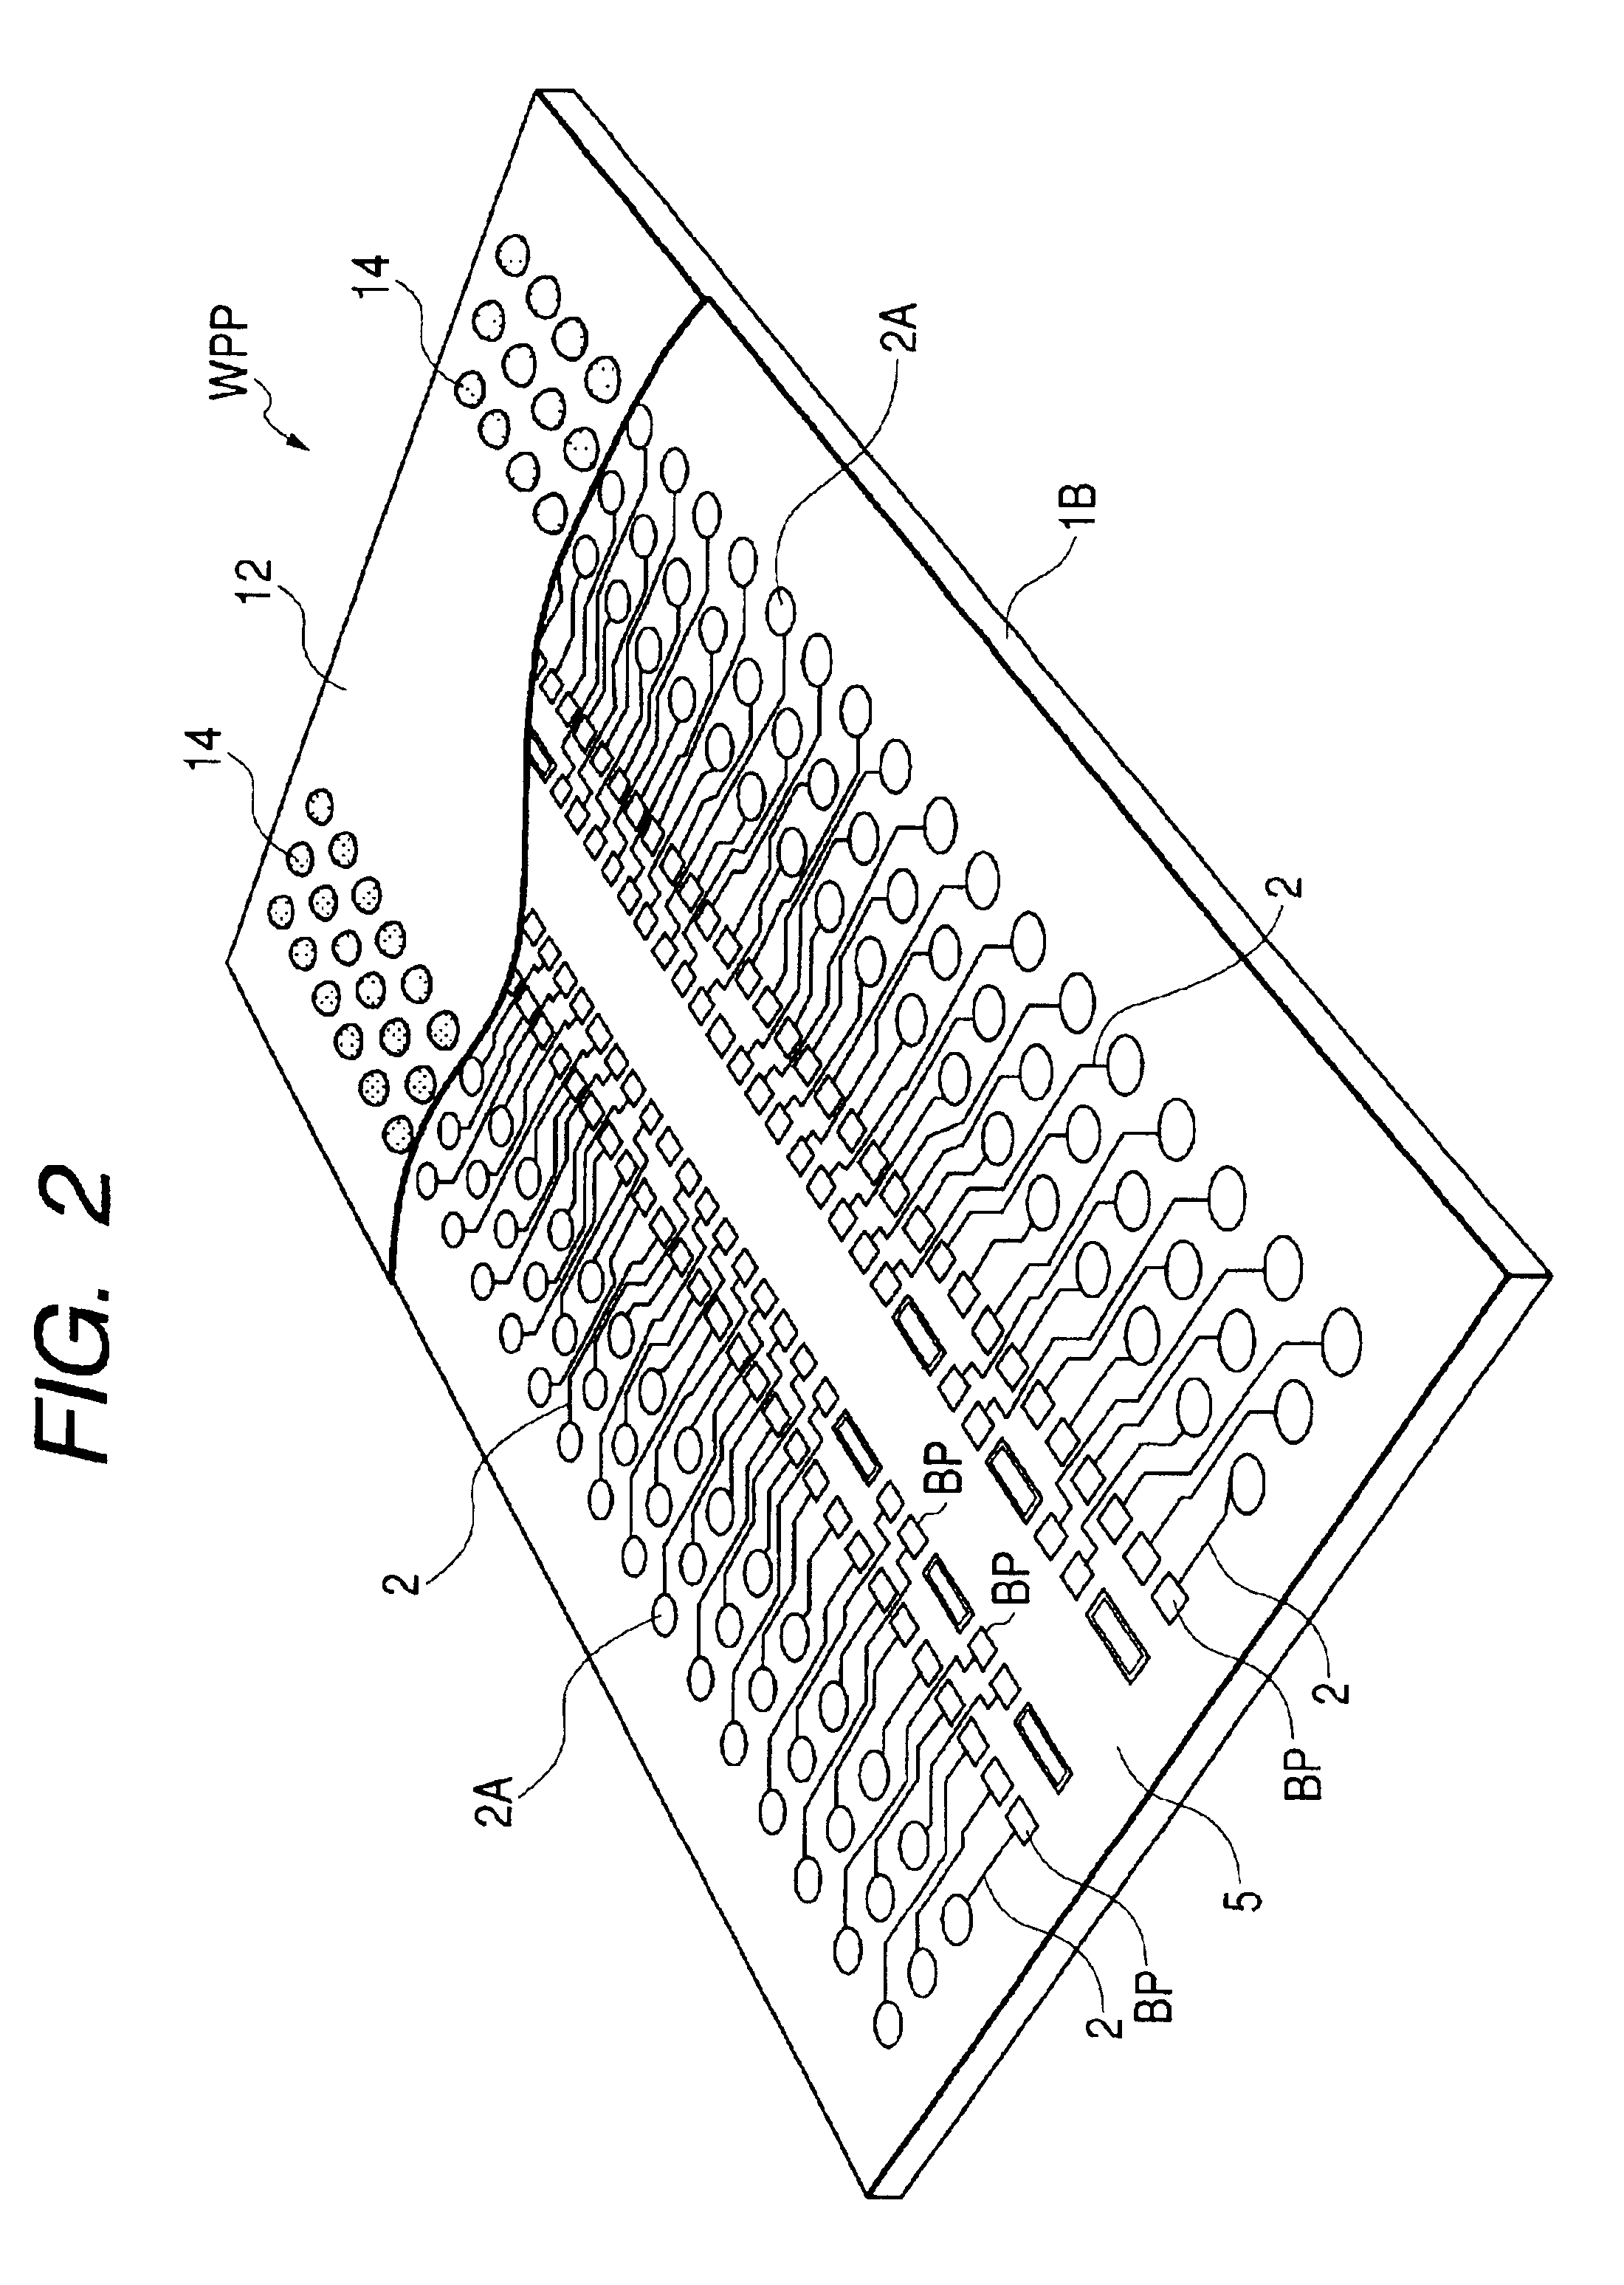 Wafer level chip size package having rerouting layers